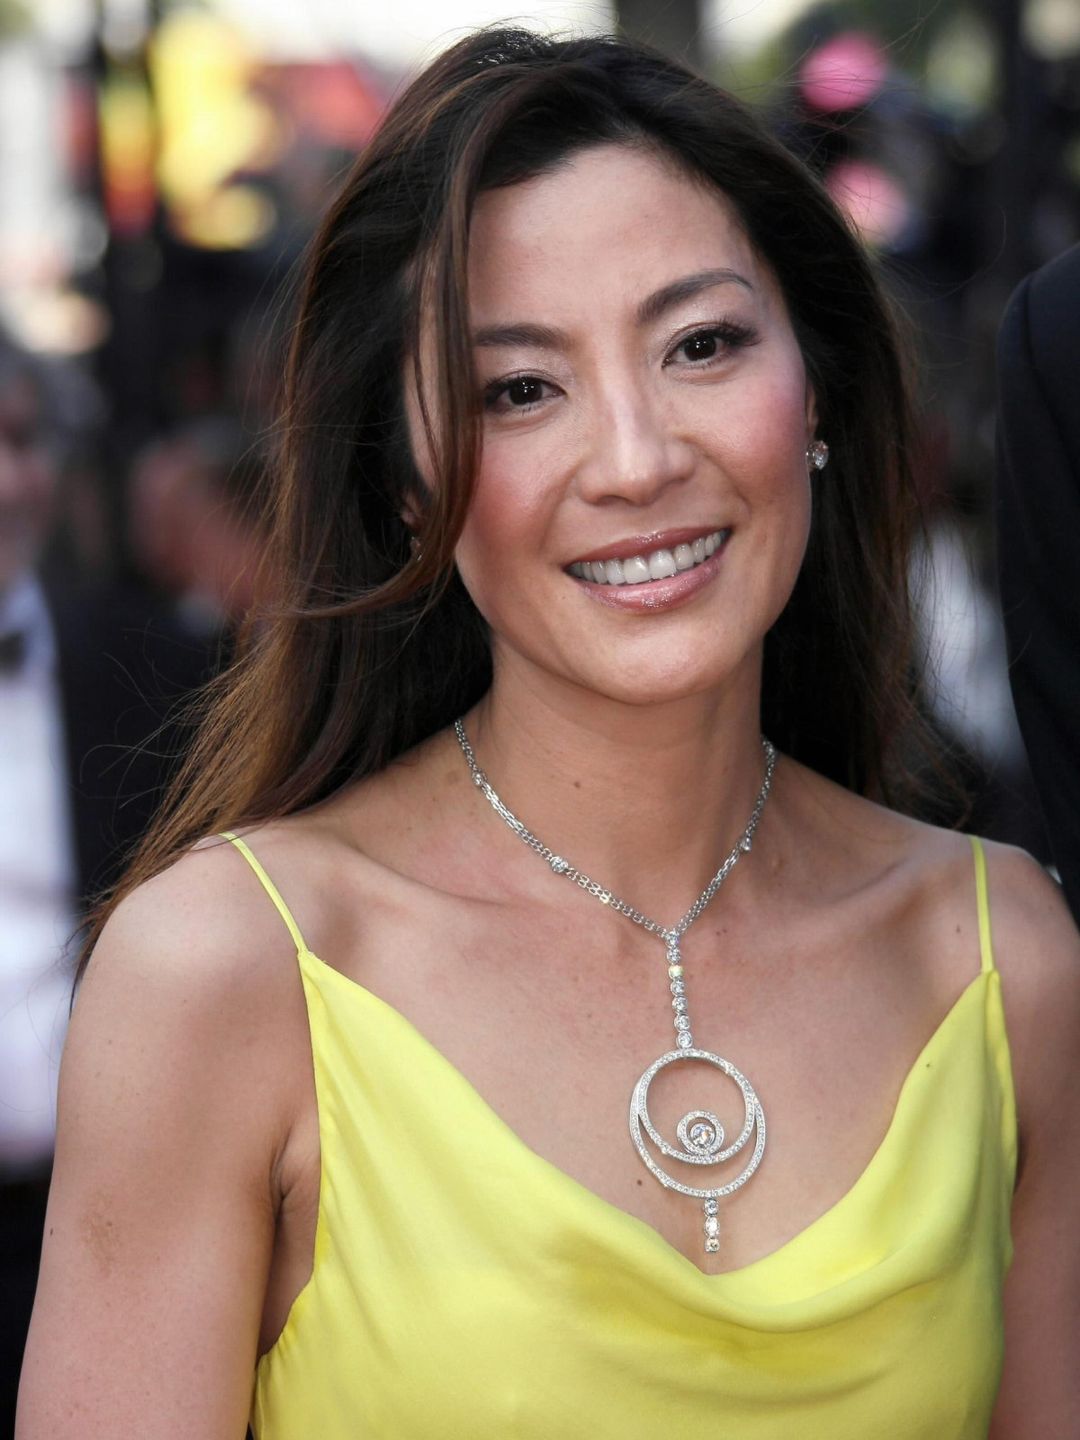 Michelle Yeoh young pics